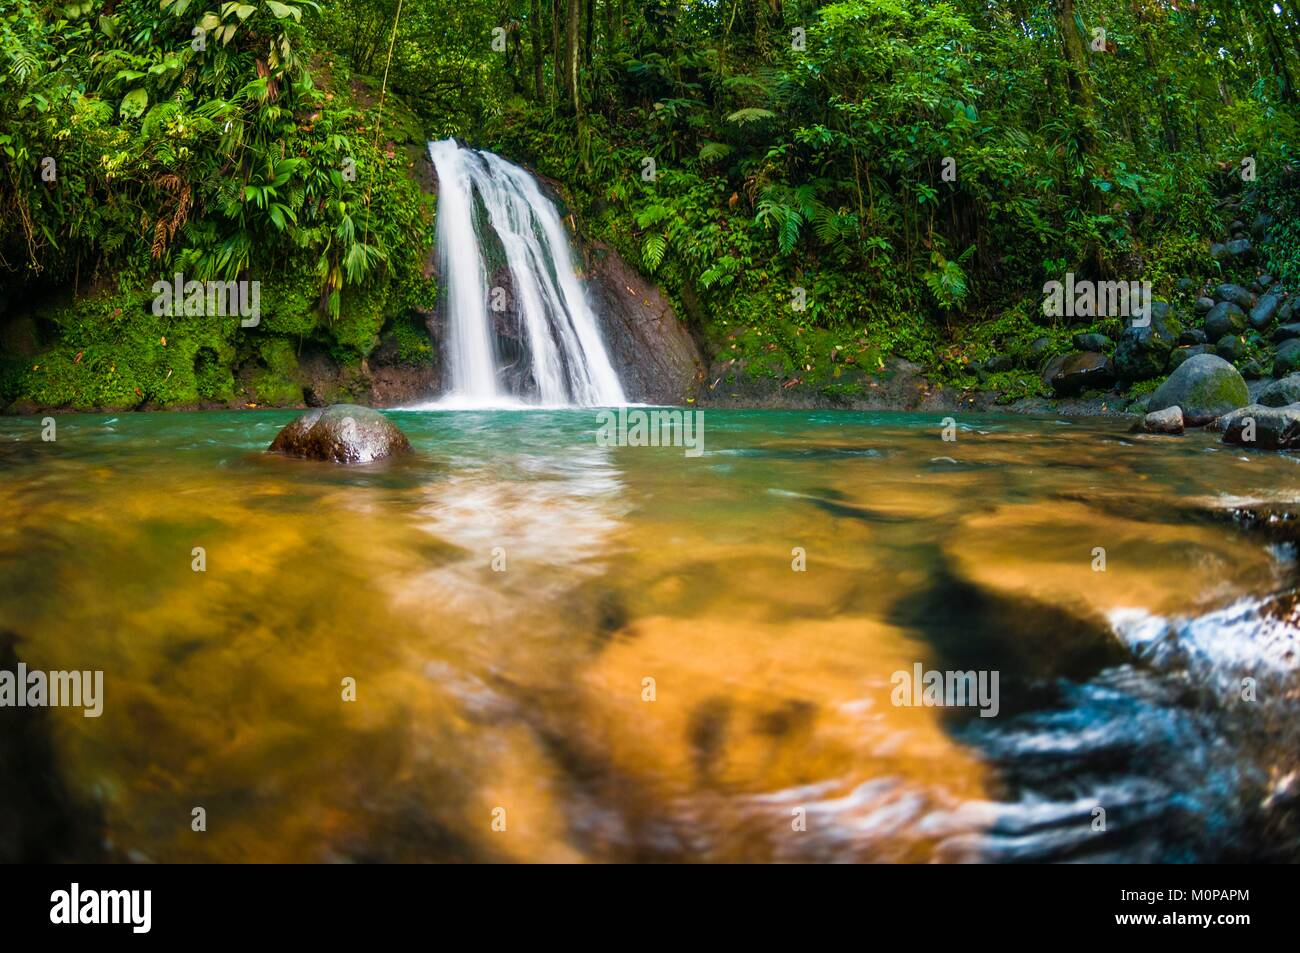 France,Caribbean,French West Indies,Guadeloupe,Basse-Terre,Petit-Bourg,Guadeloupe National Park,the Cascade aux Écrevisses (Crayfish Waterfall) and its basin Stock Photo